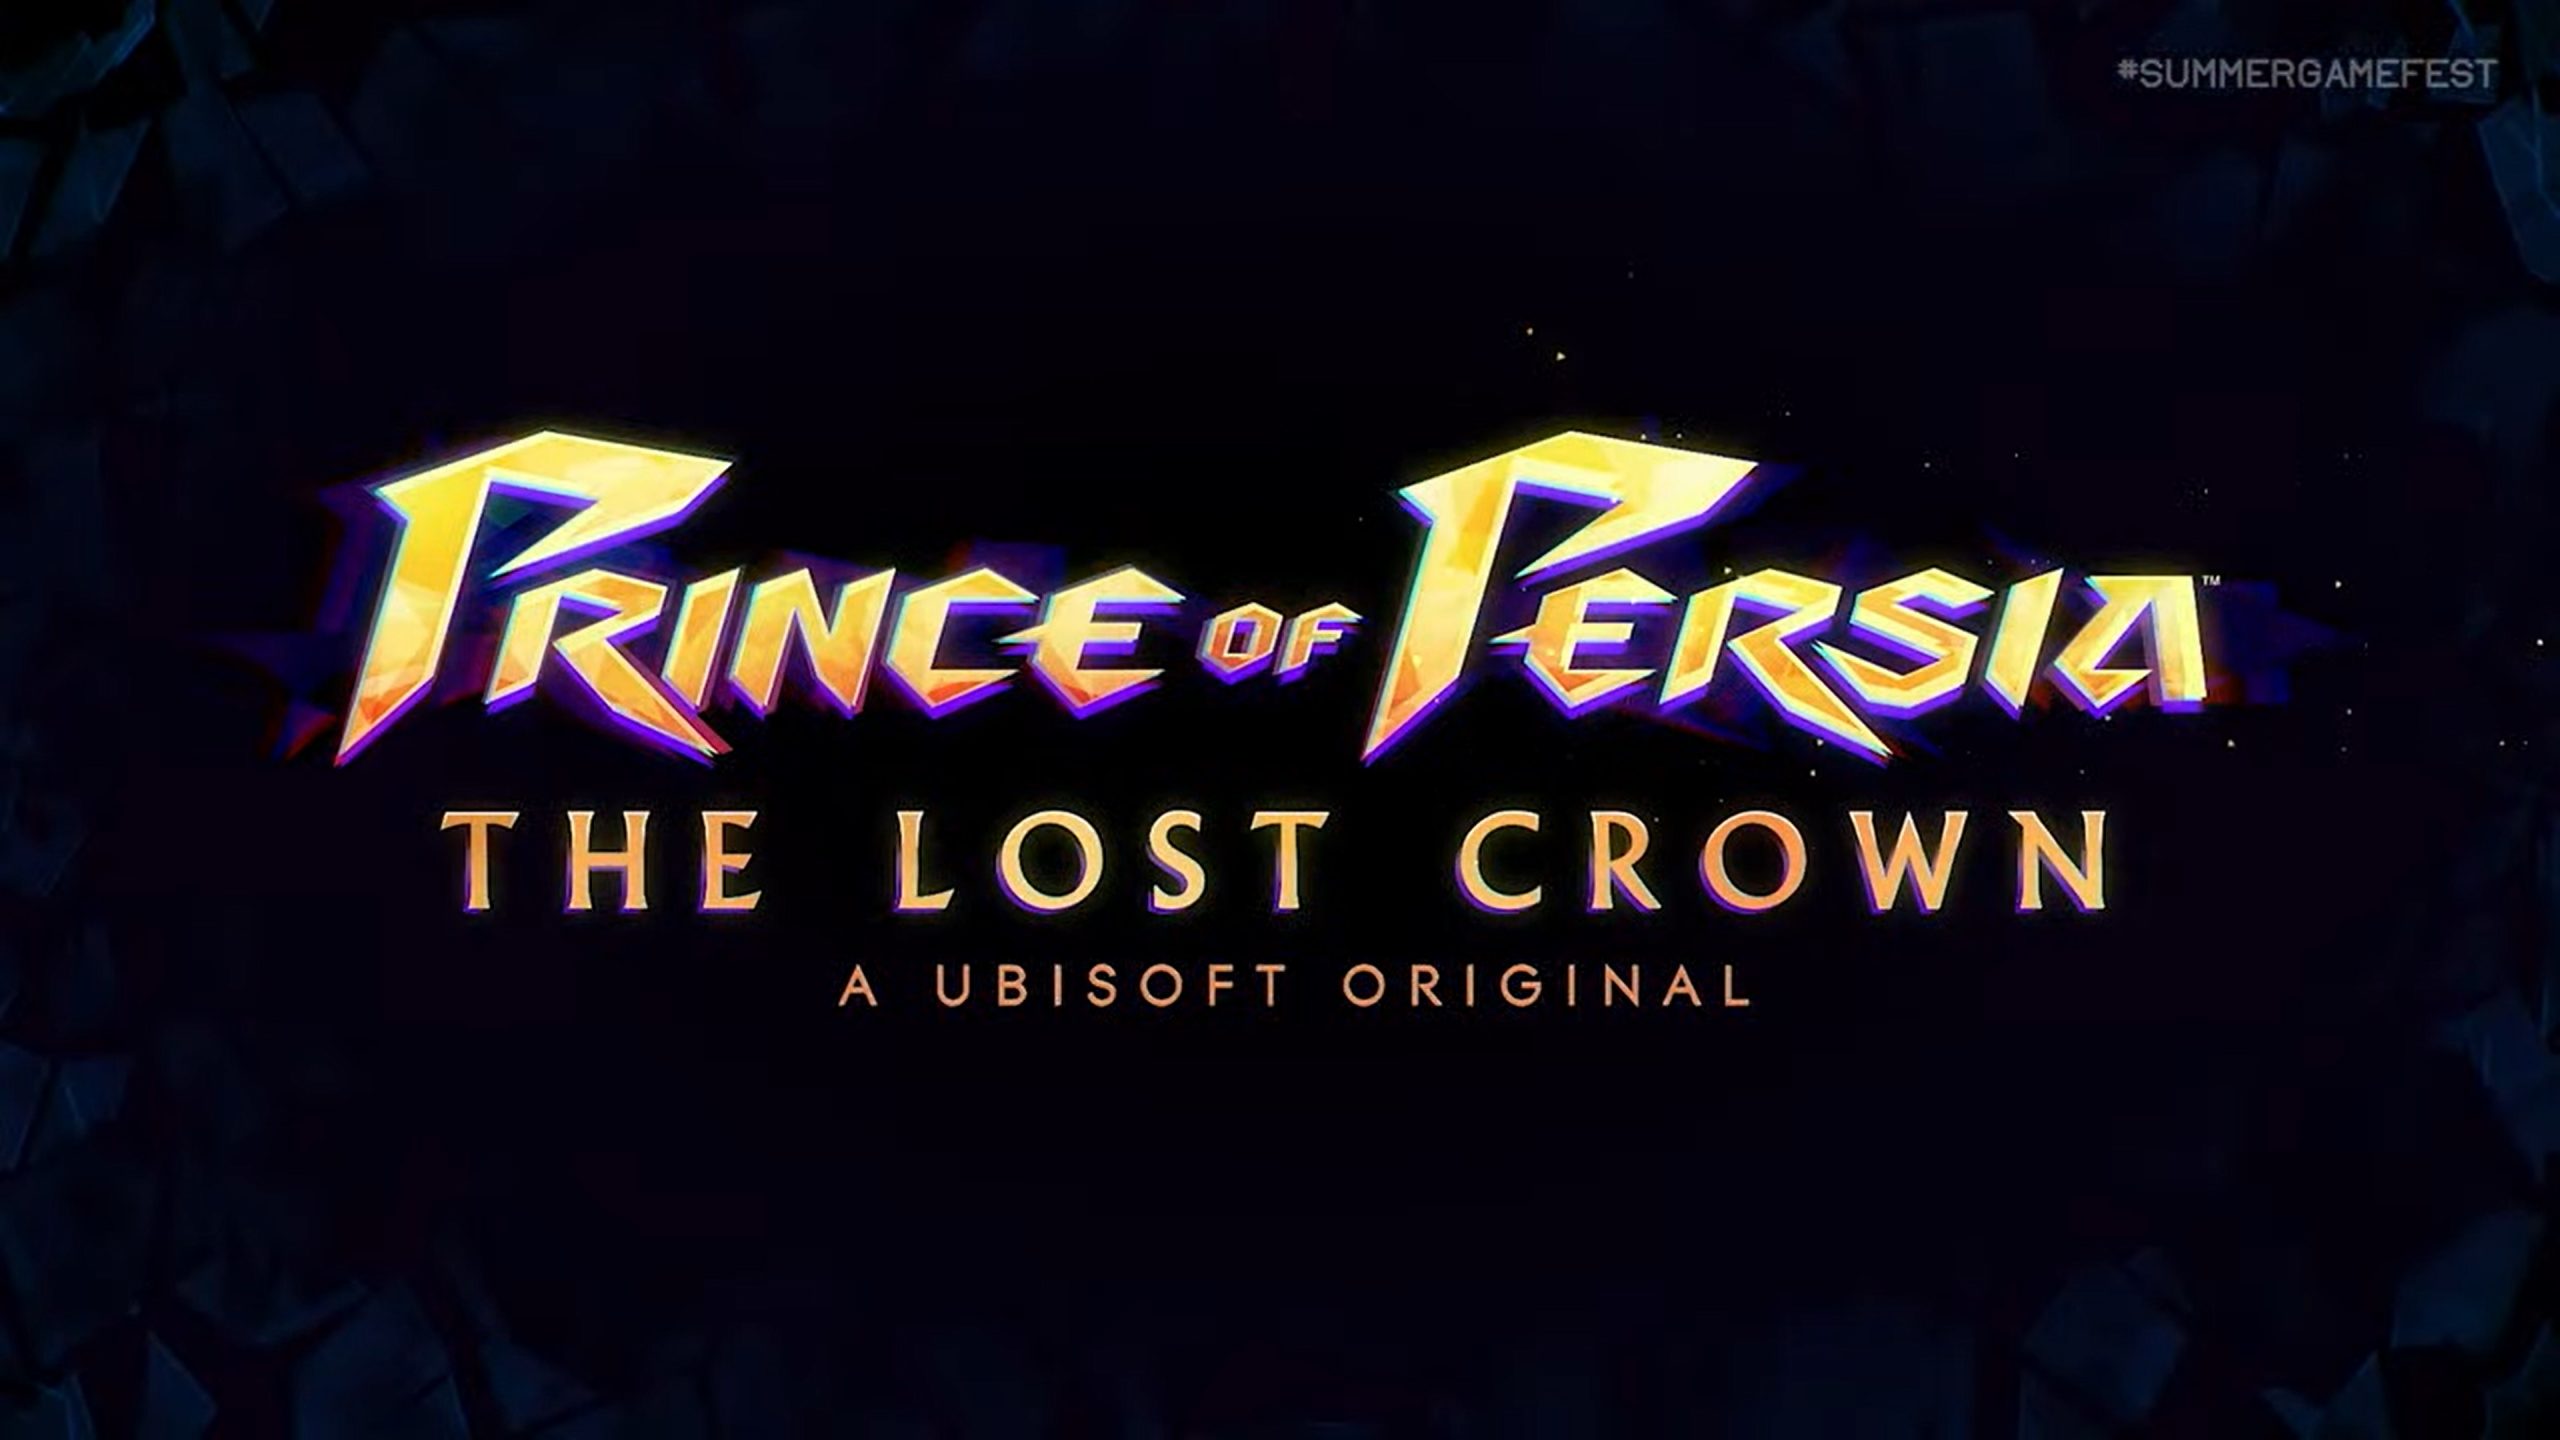 Prince of Persia: The Lost Crown announced - My Nintendo News